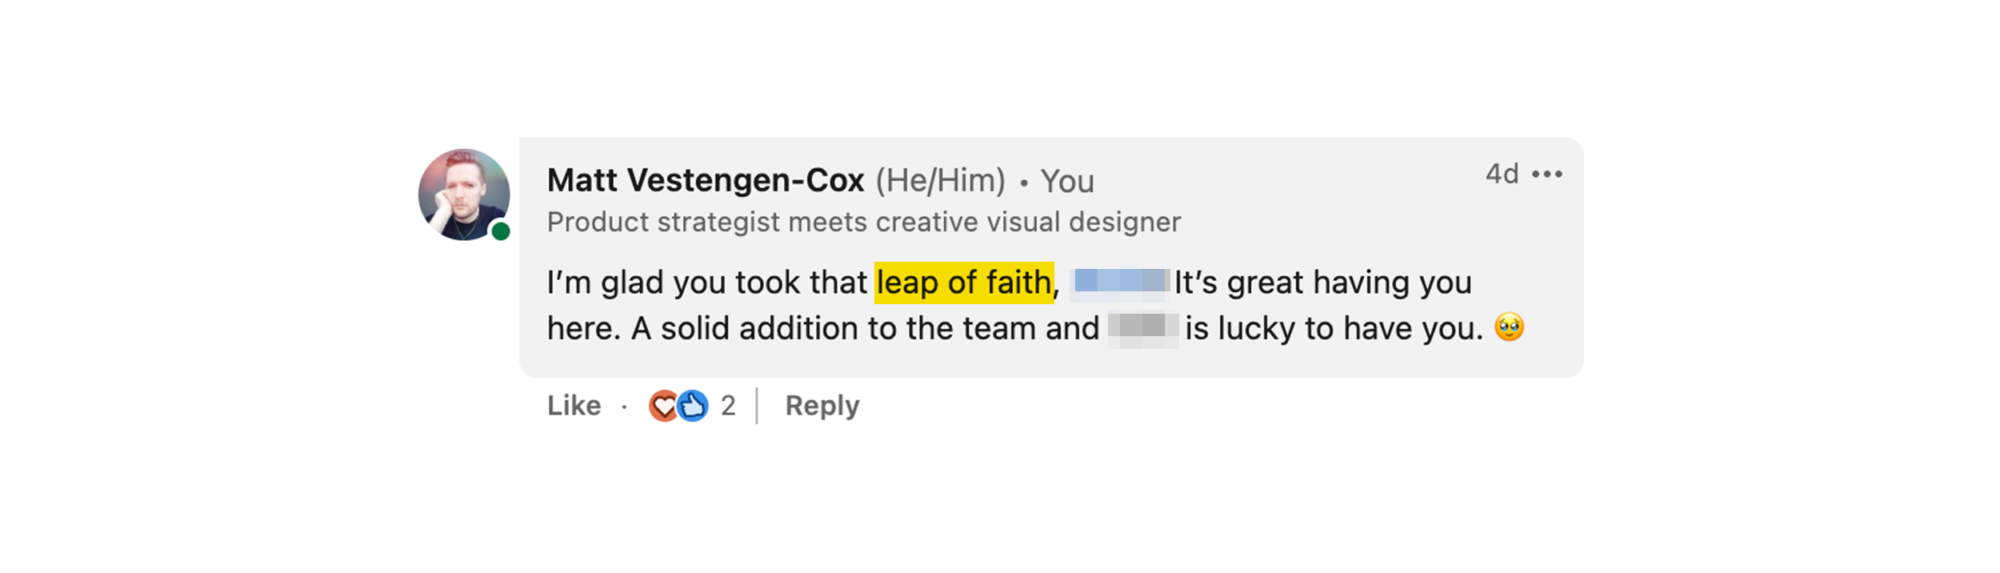 A screenshot of the comment I replied with. It reads:

I’m glad you took that leap of faith, (redacted)! It’s great having you here. A solid addition to the team and (redacted) is lucky to have you. ð¥¹